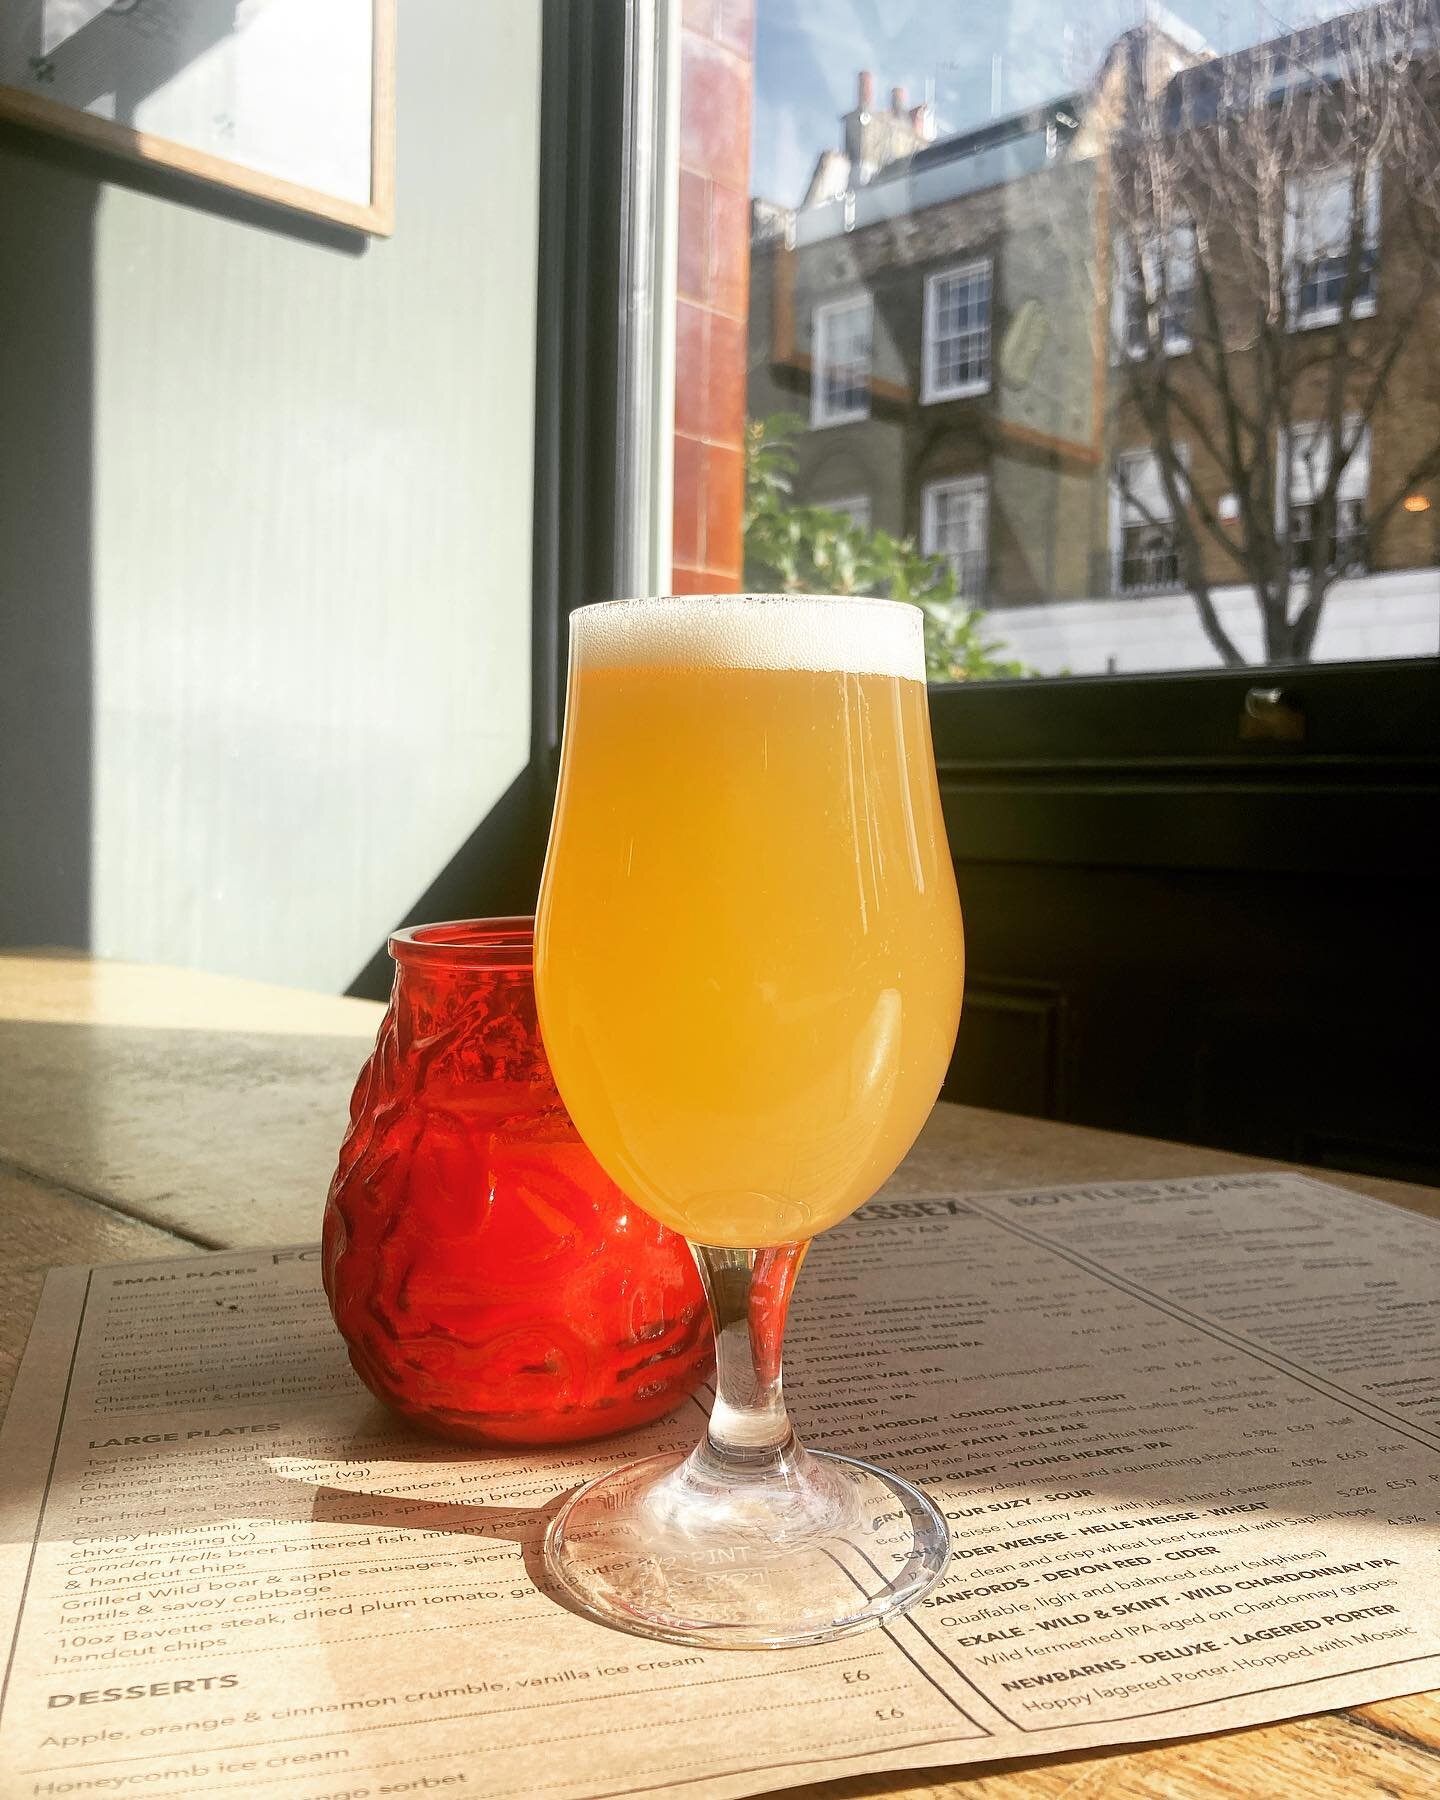 @lefthandedgiantbrewing Young Hearts fresh hop IPA on tap now. 

Tons of tropical fruit, super drinkable and perfect to enjoy in the sunshine in our garden today. 

Cheers 🍻 

#craftbeer #craftbeerlondon #angel #islington #beerislington #lefthandedg